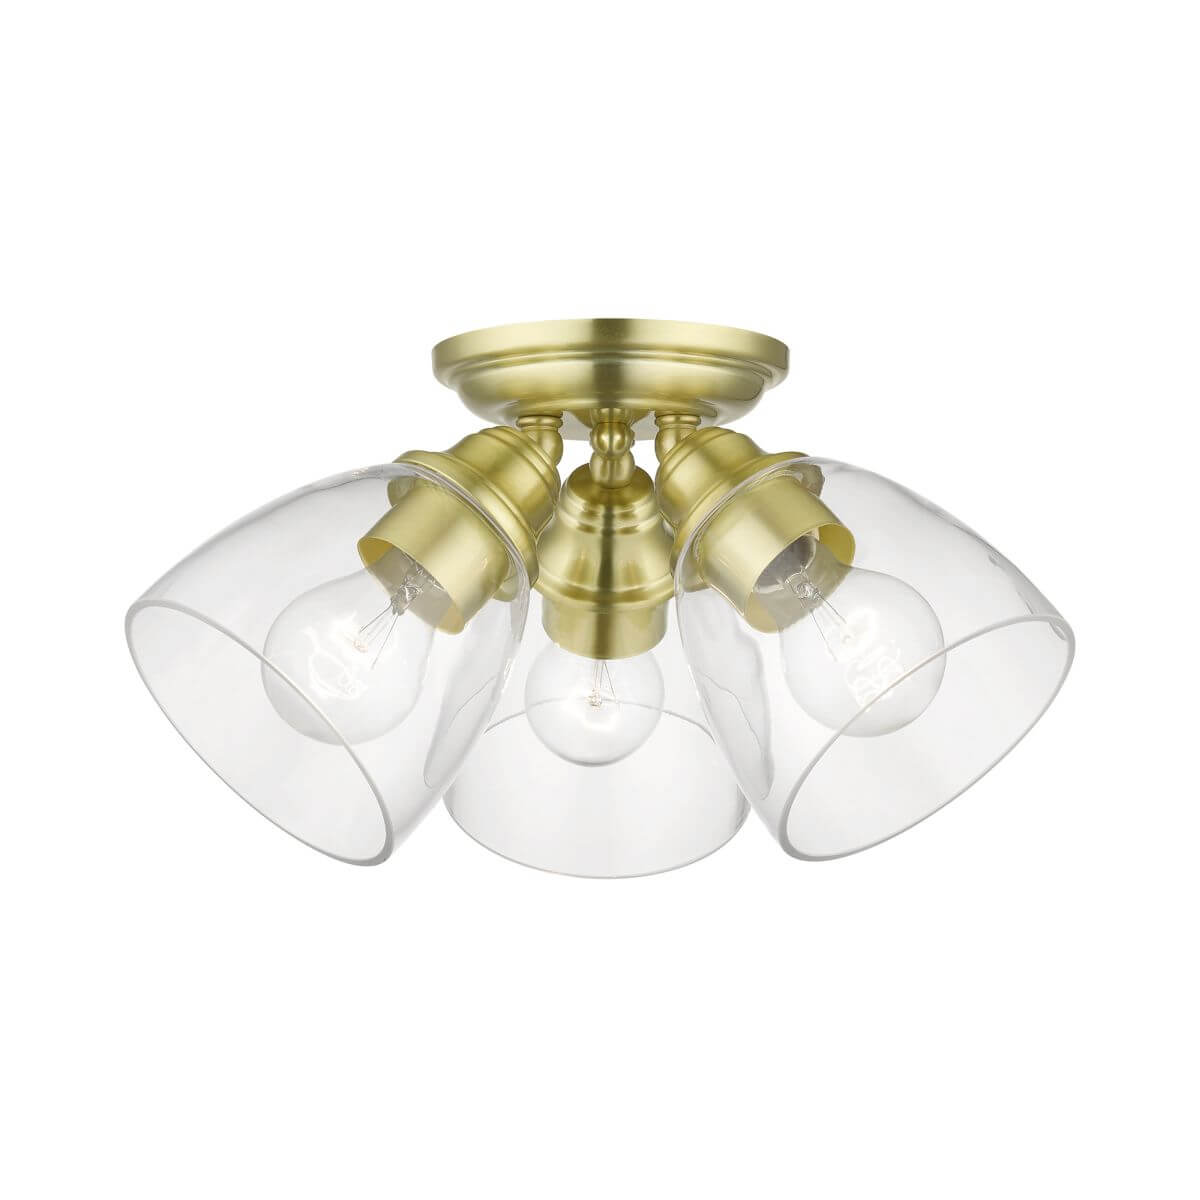 Livex 46339-12 Montgomery 3 Light 14 inch Semi-Flush Mount in Satin Brass with Hand Blown Clear Glass